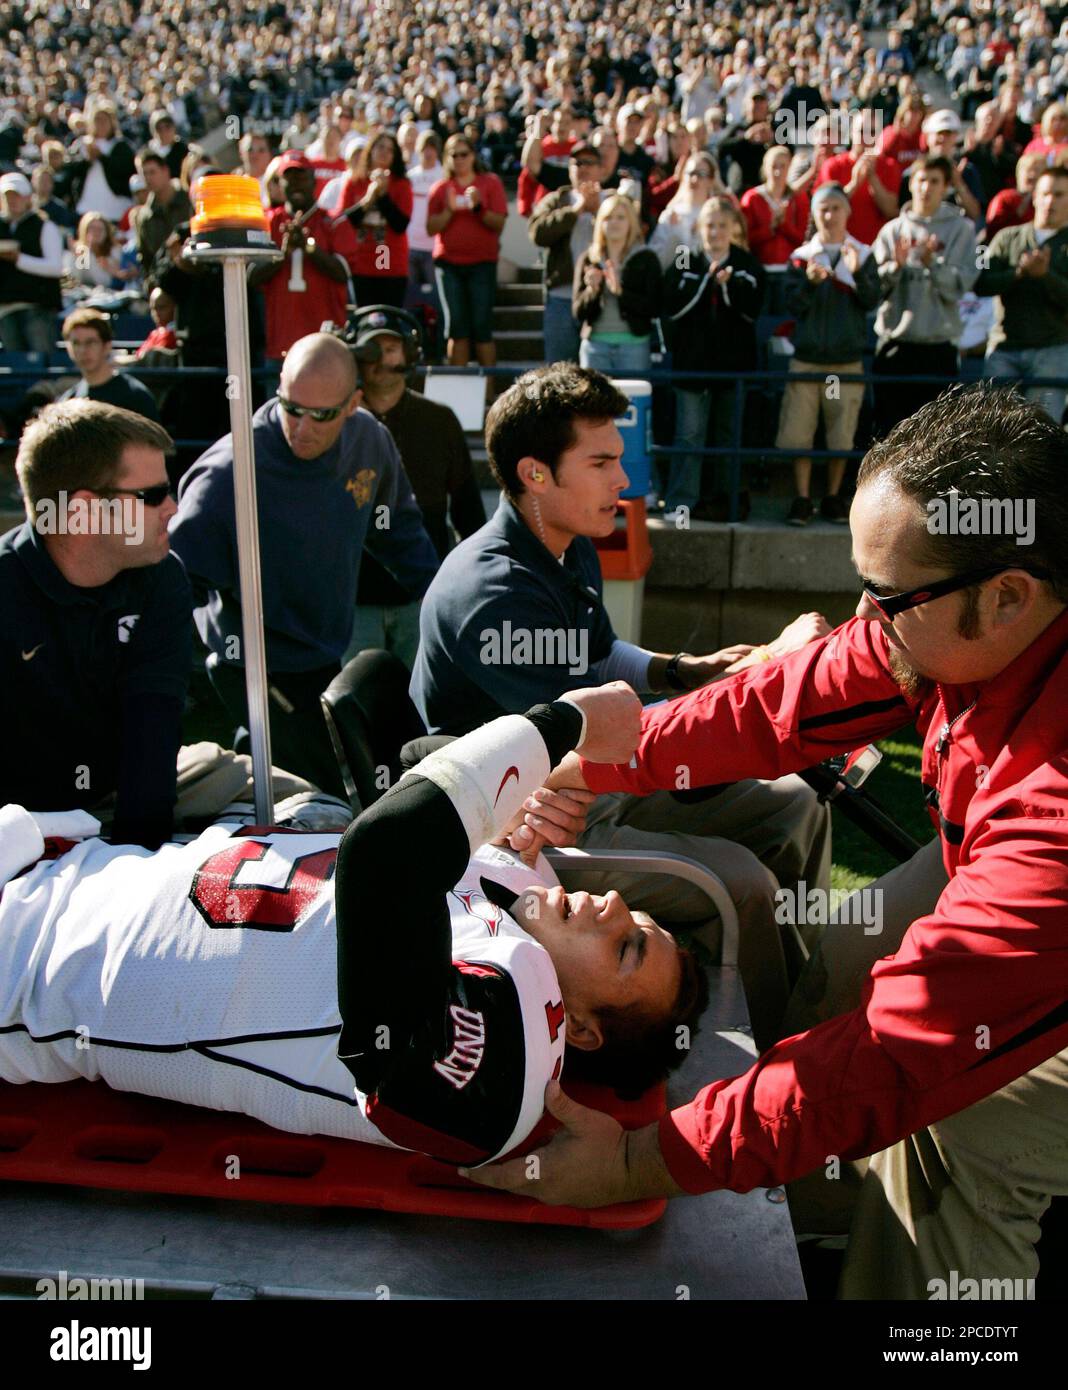 UNLV quarterback Shane Steichen (15) acknowledges the crowd's applause as  he is taken off the field with an dislocated and fractured right ankle  during the third quarter of a college football game